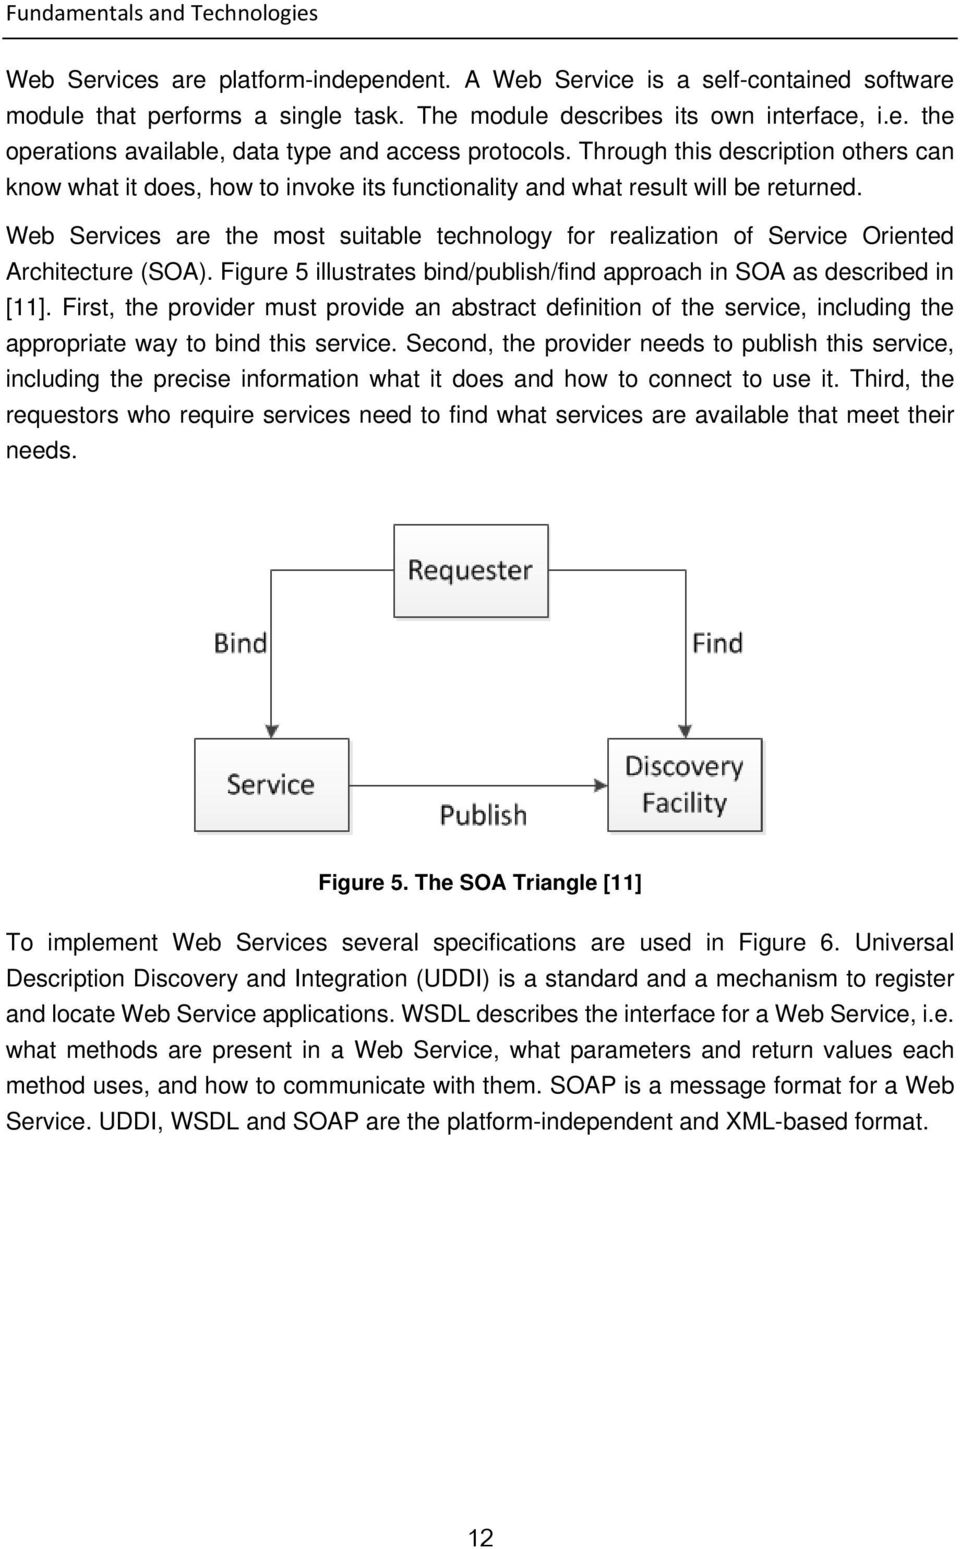 Web Services are the most suitable technology for realization of Service Oriented Architecture (SOA). Figure 5 illustrates bind/publish/find approach in SOA as described in [11].